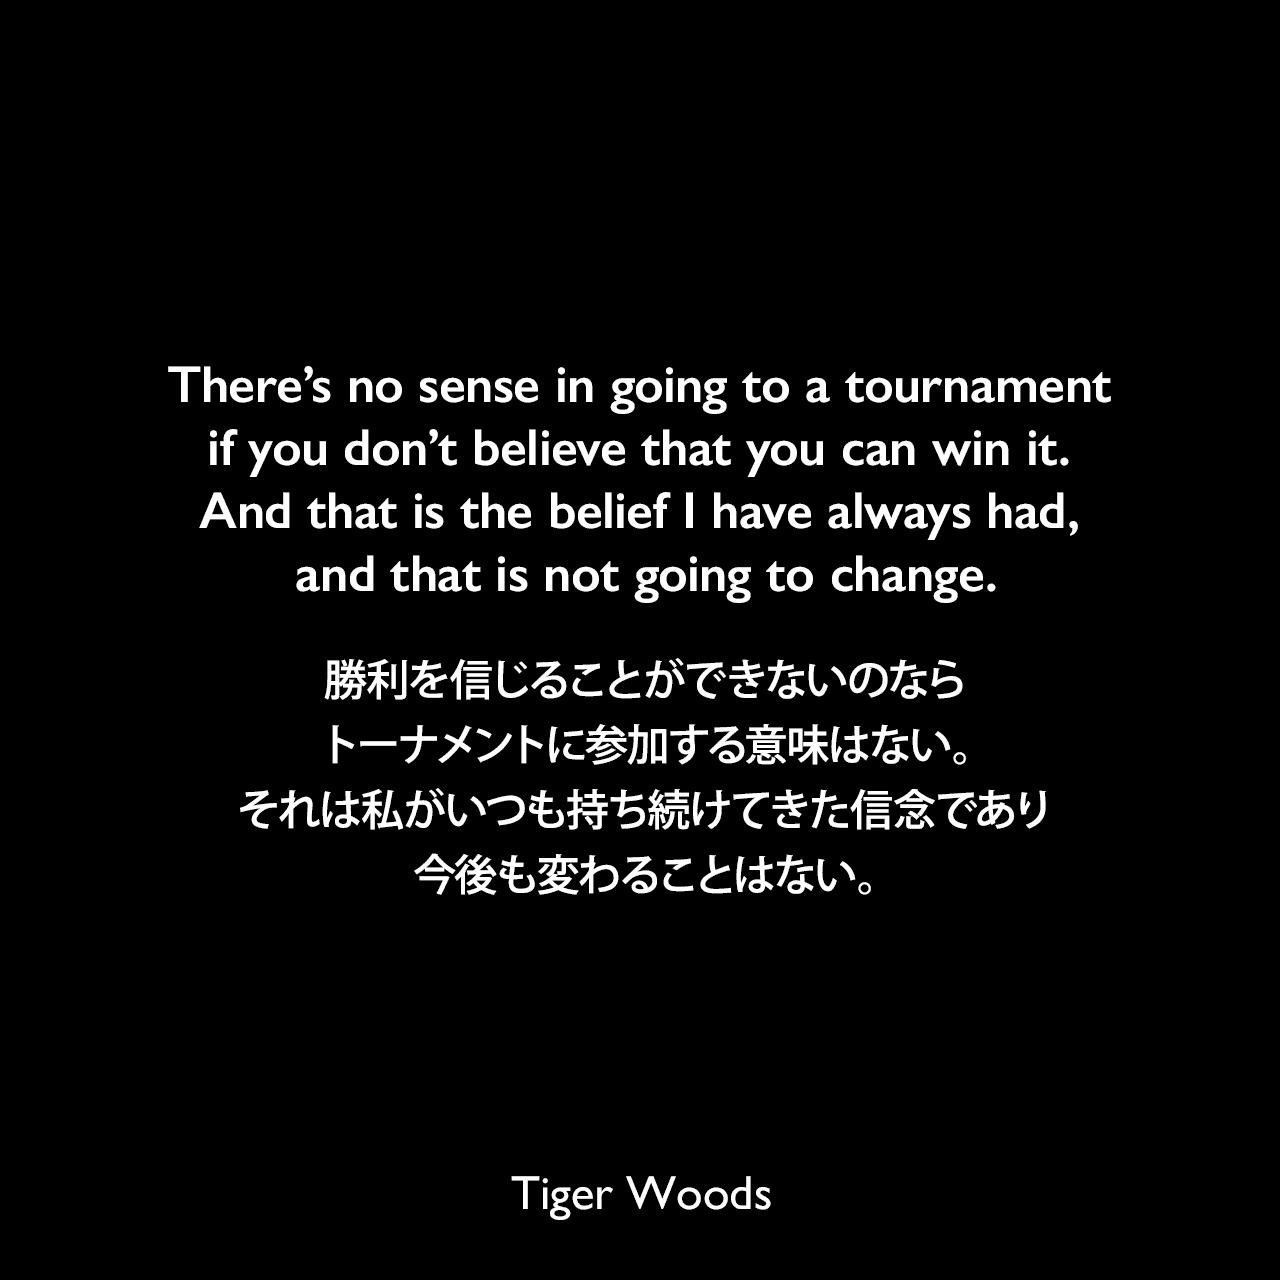 There’s no sense in going to a tournament if you don’t believe that you can win it. And that is the belief I have always had, and that is not going to change.勝利を信じることができないのならトーナメントに参加する意味はない。それは私がいつも持ち続けてきた信念であり、今後も変わることはない。Tiger Woods